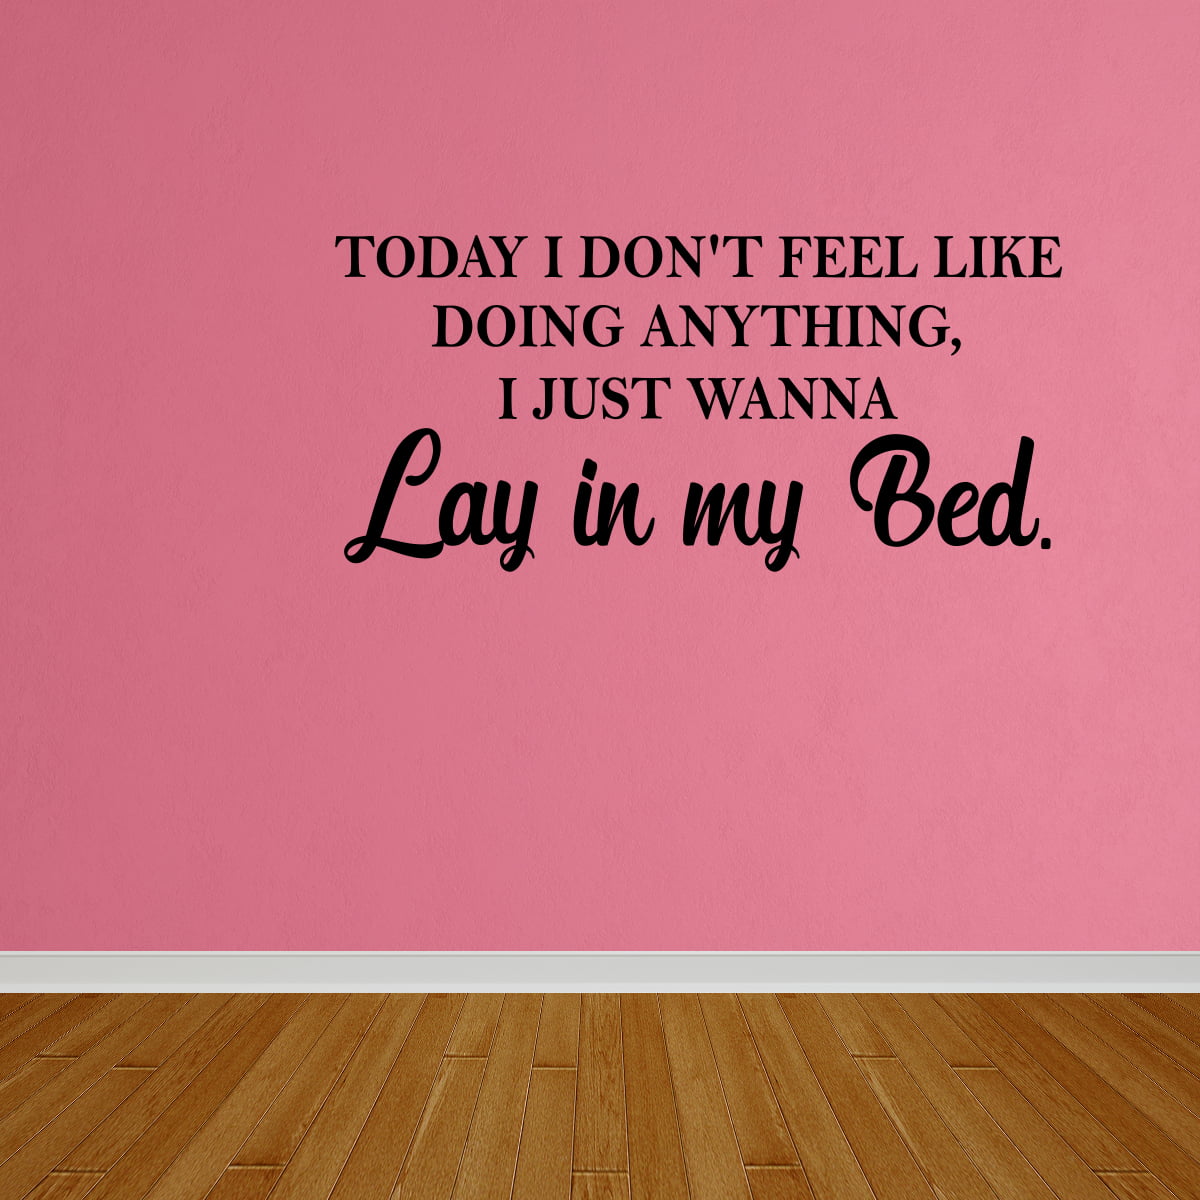 Bruno Mars Lay in my Bed Quote Art Sticker Mural Easy Peel&Stick On Vinyl Decal 